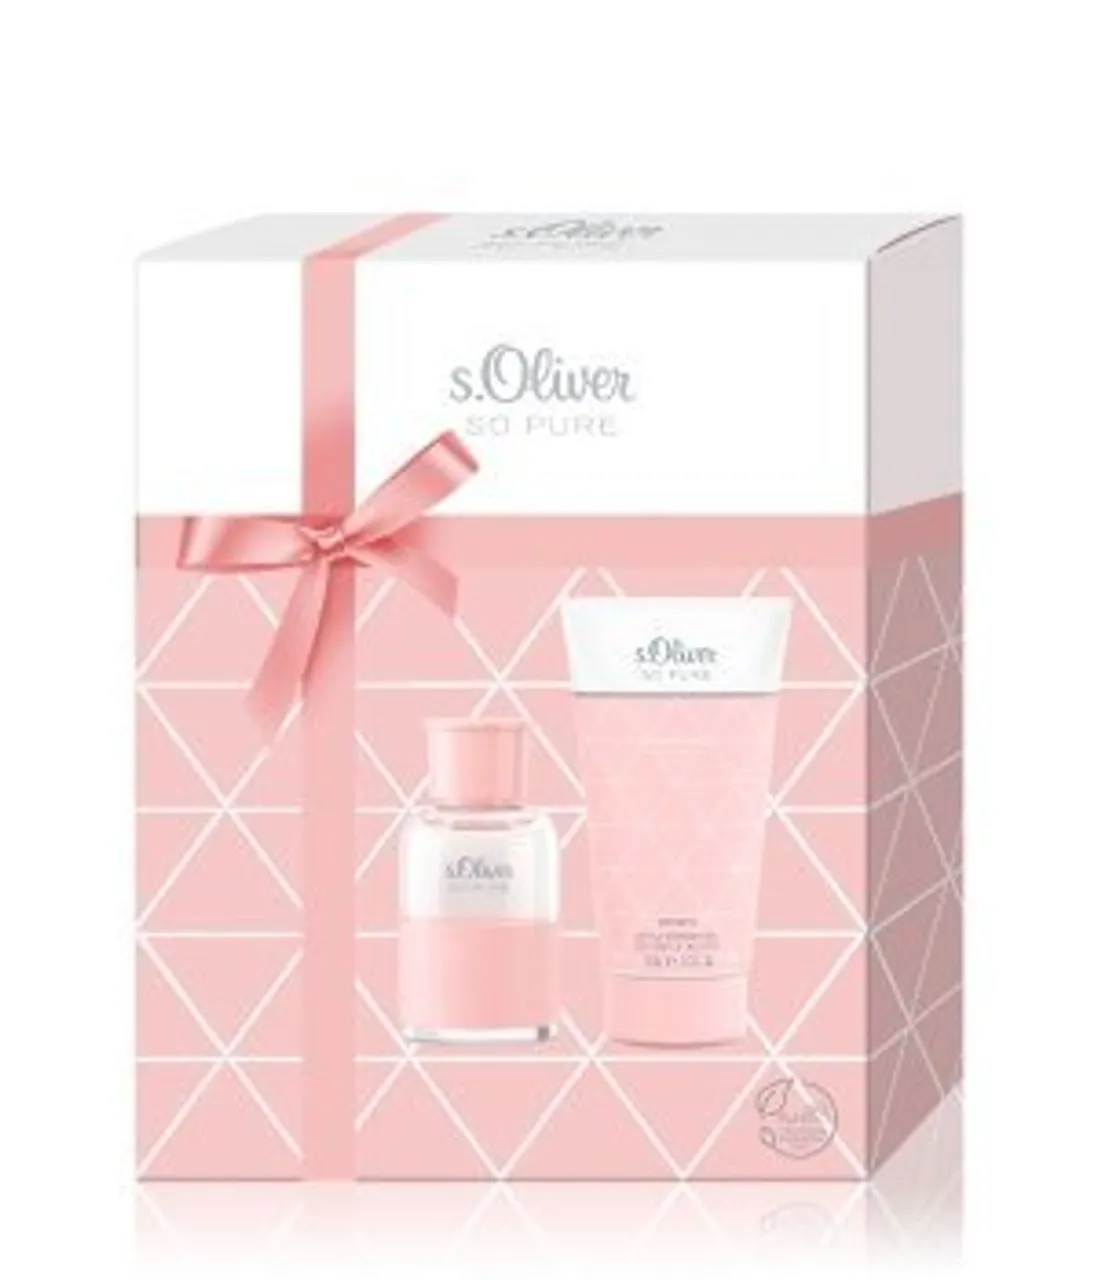 s. Oliver So Pure Woman Gift Set